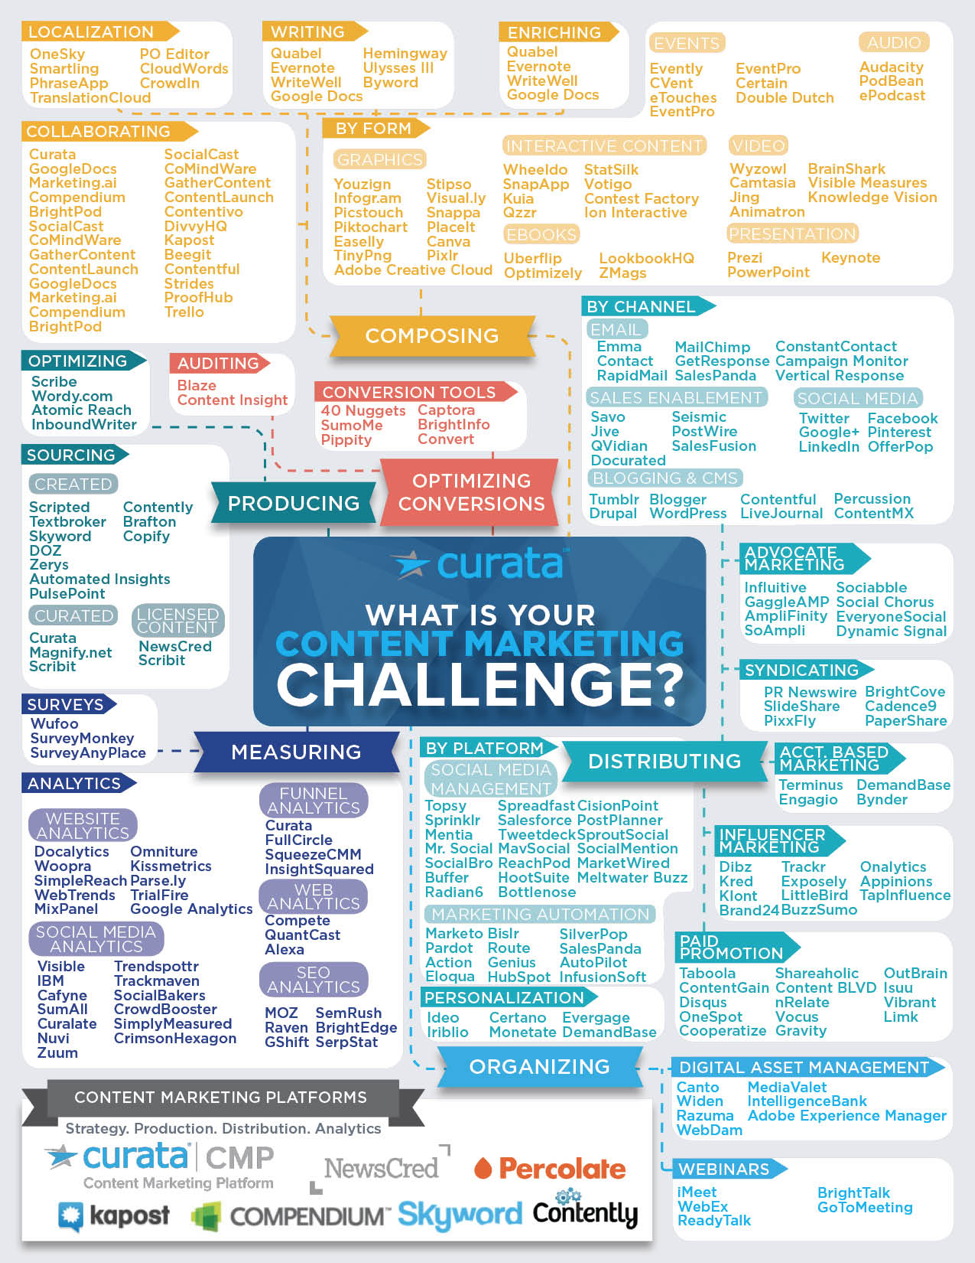 What is your content marketing challenge